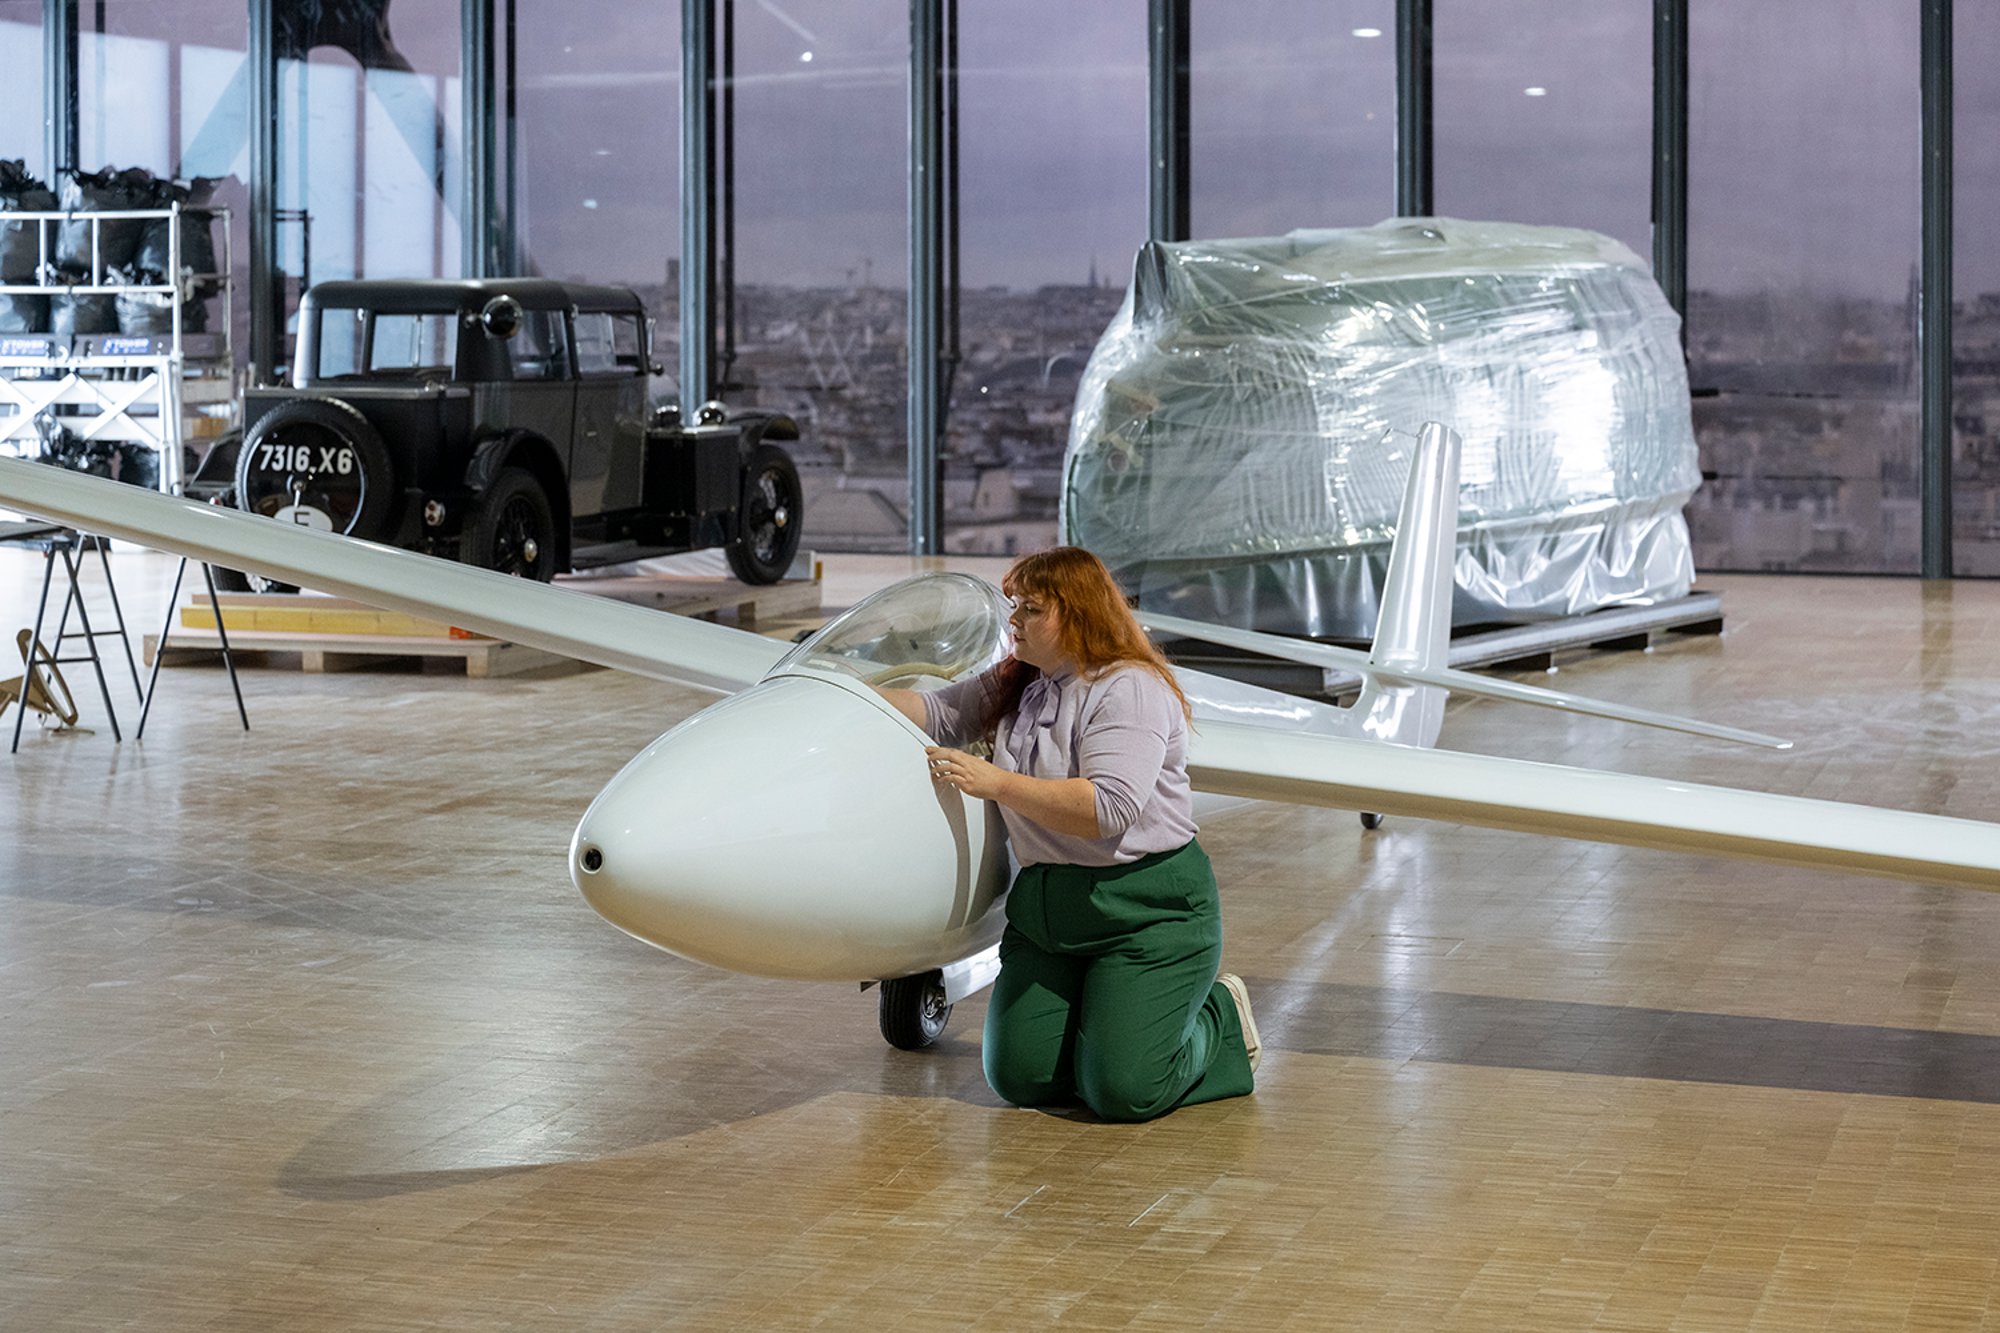 The glider, Dymaxion and Voisin C7 Lumineuse being installed in the empty exhibition space, before any of the other objects, models and artworks arrived.